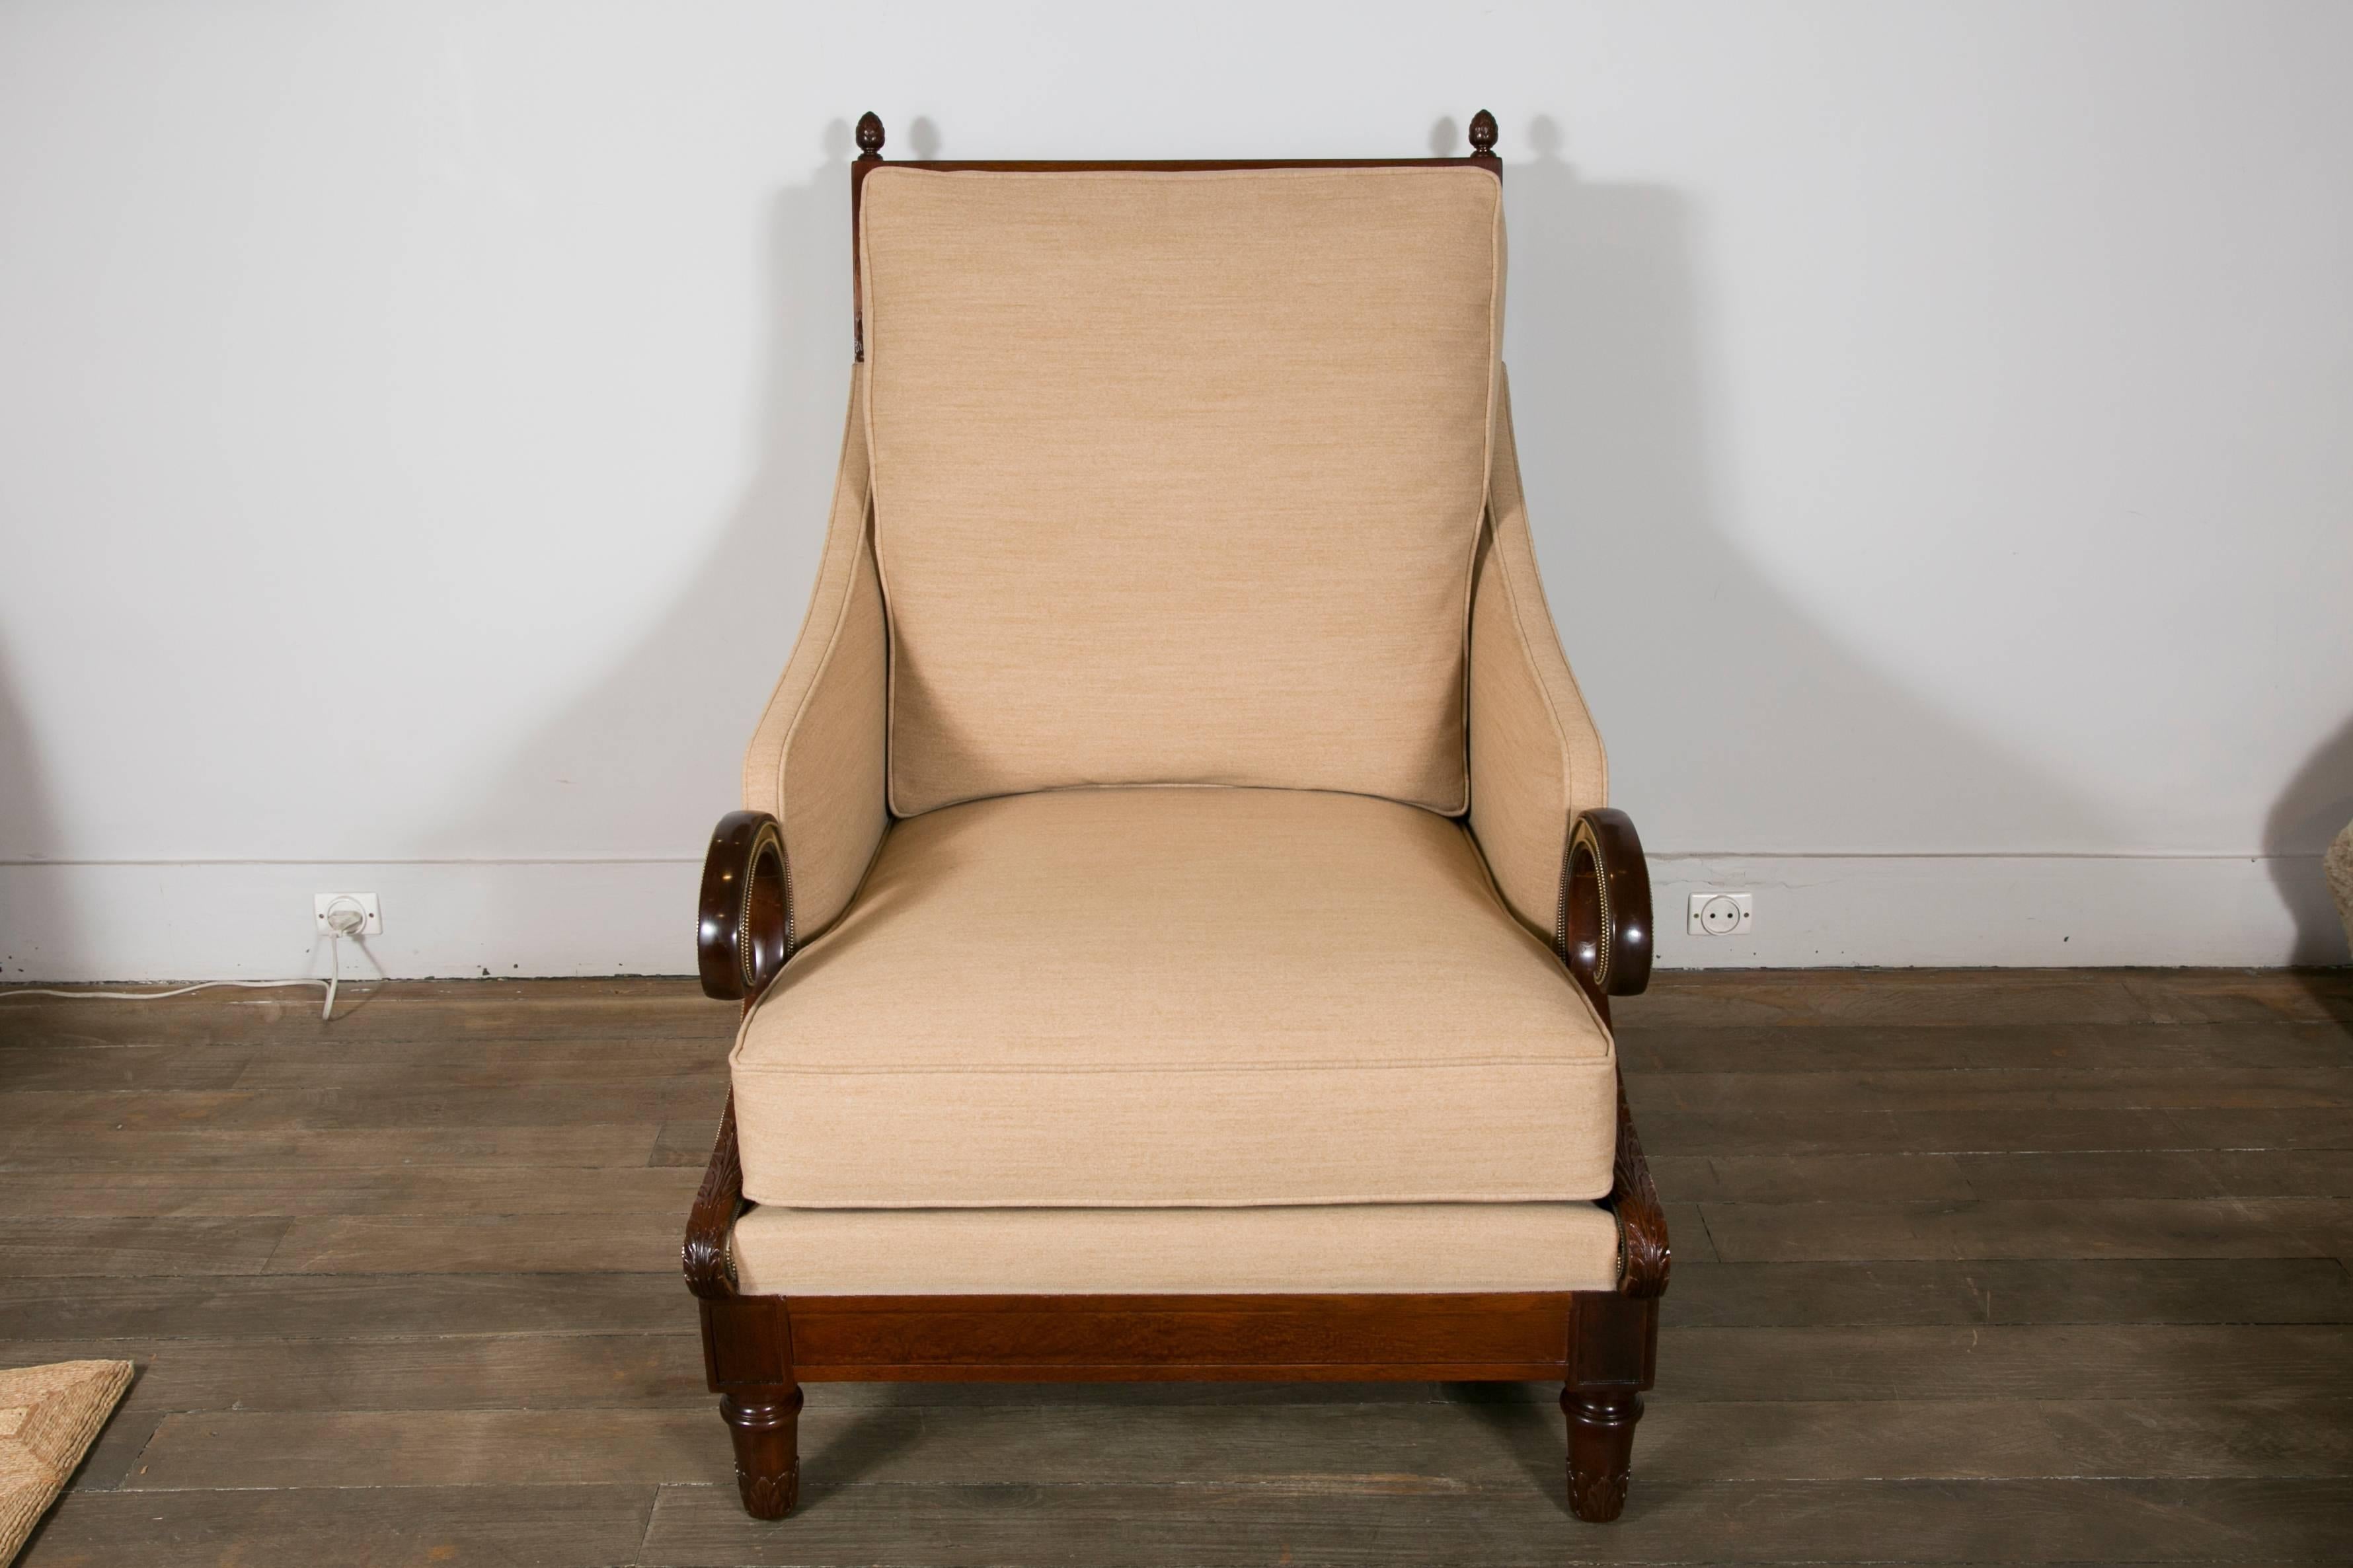 Large pair of mahogany and bronze lounge chairs, with scrolled arms and foliage decoration in bronze.
Newly re upholstered
Attributed to Maison Jansen
France, 1950s.